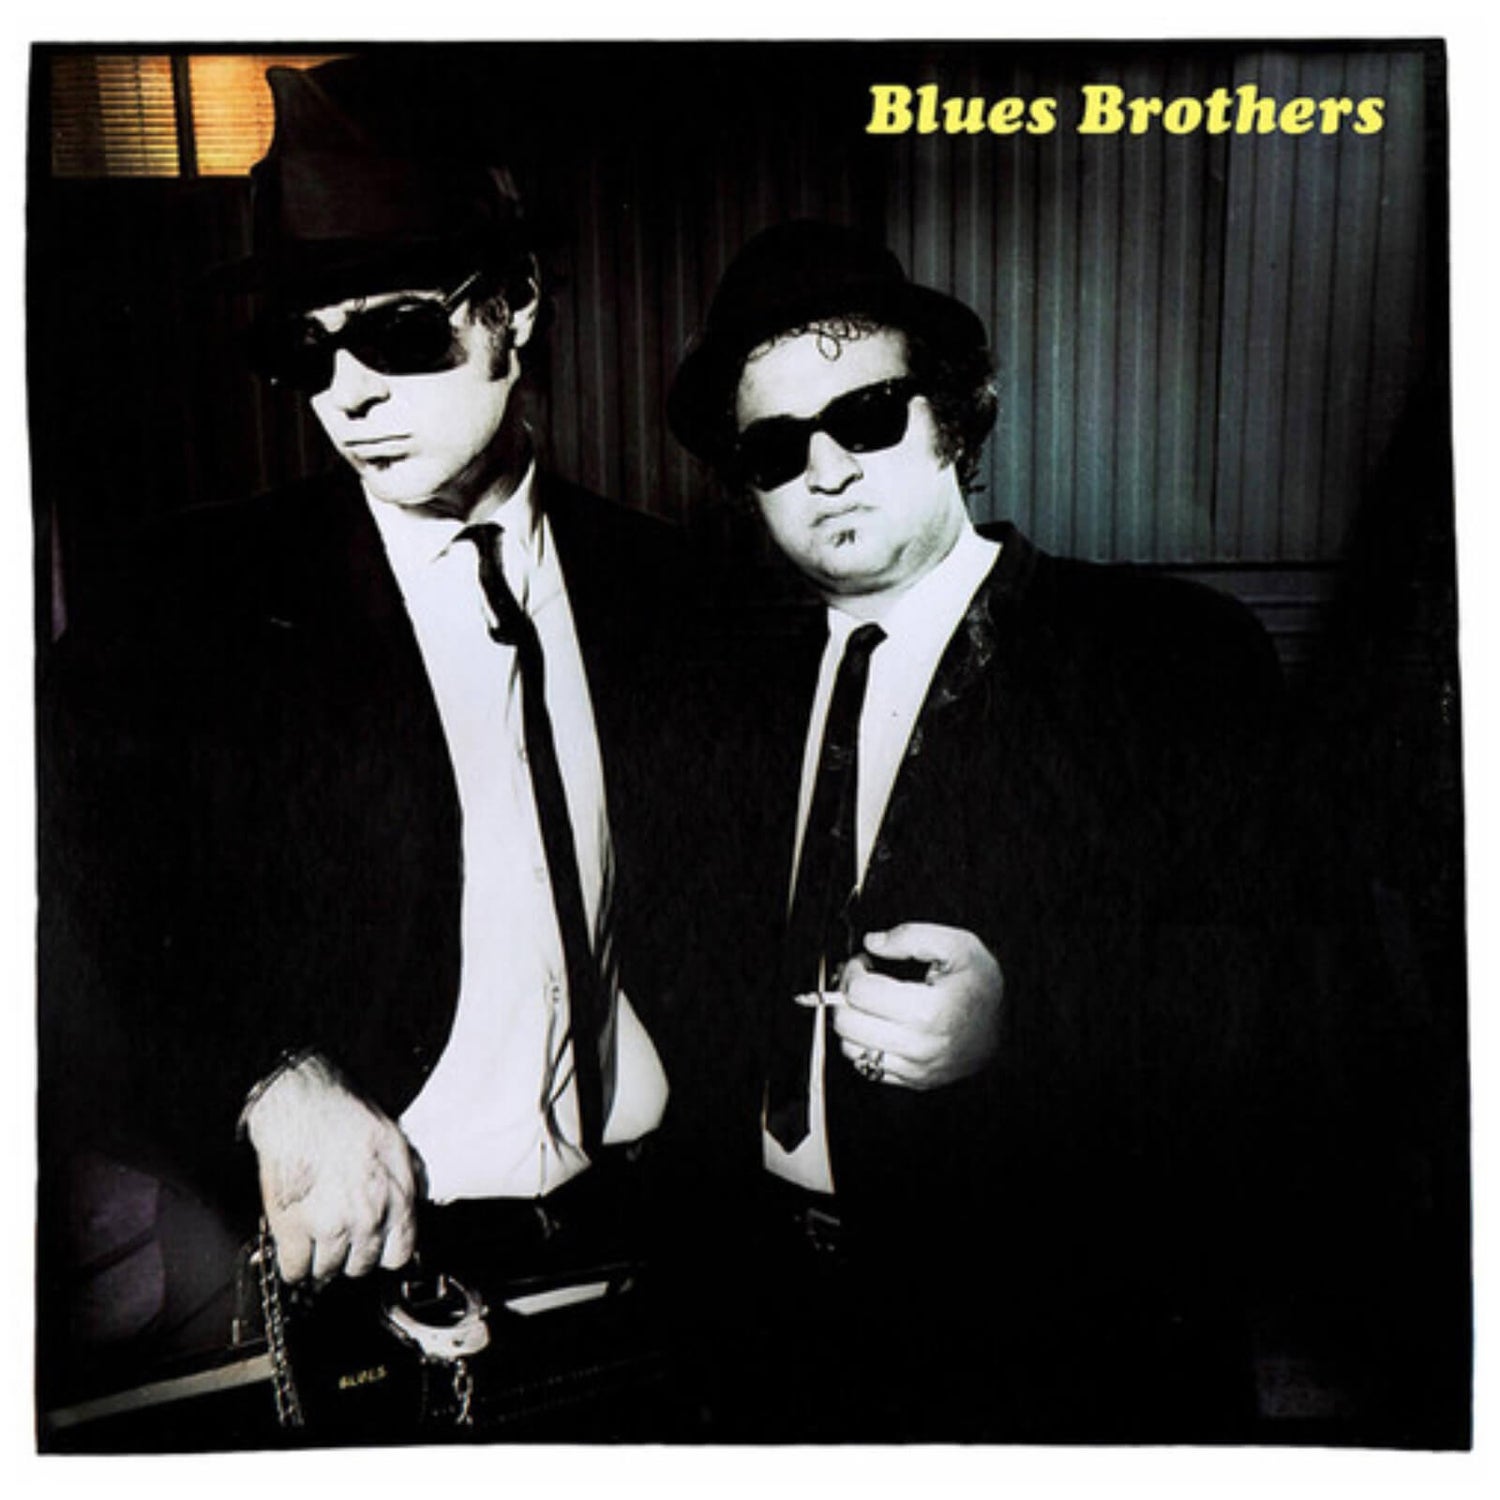 The Blues Brothers - Briefcase Full Of Blues 180g Vinyl (Blue)